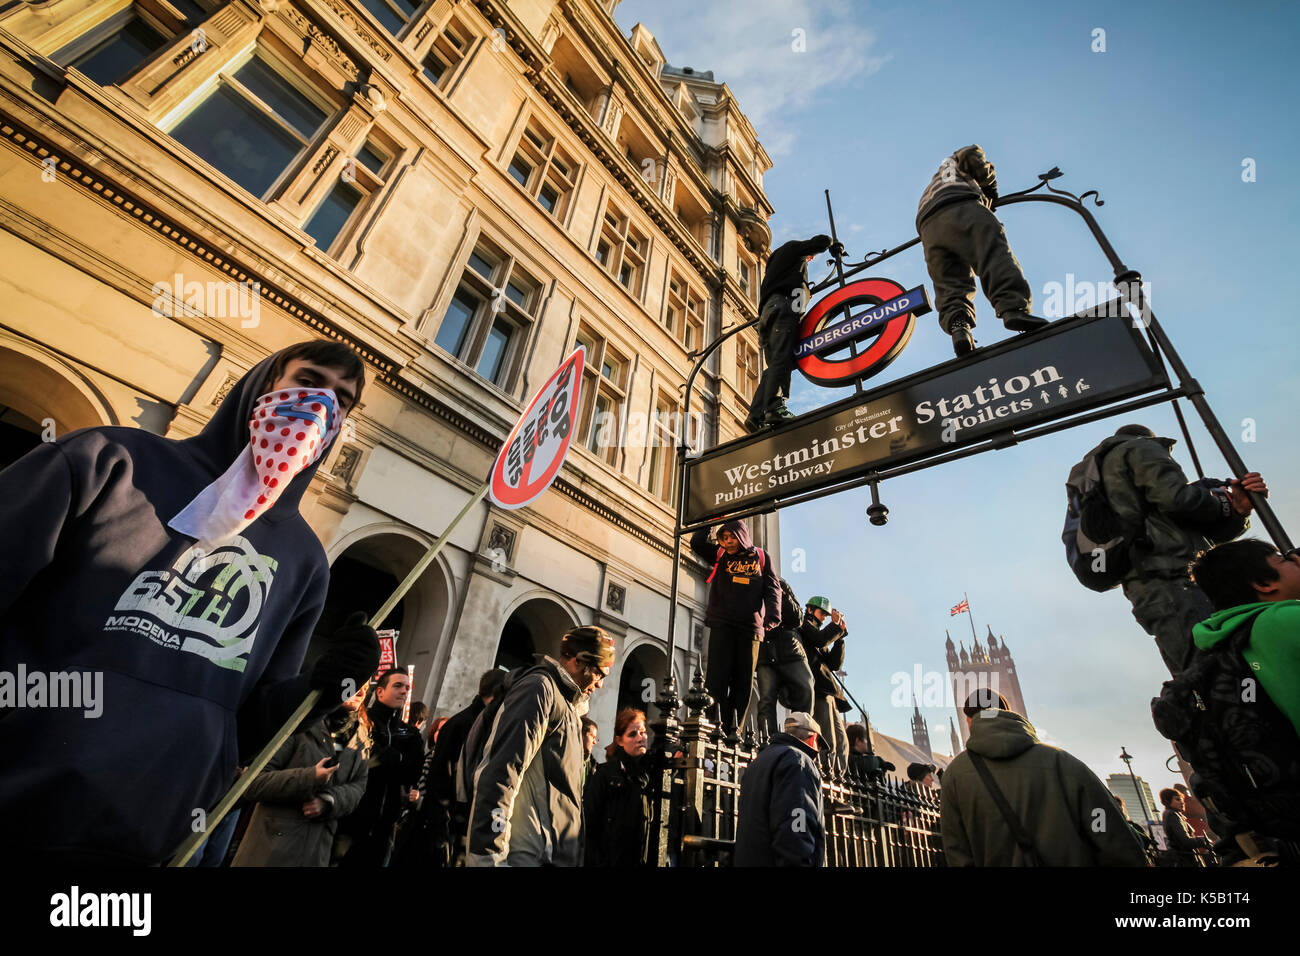 Mass student protests and civil unrest in London against increases in university tuition fees. Stock Photo